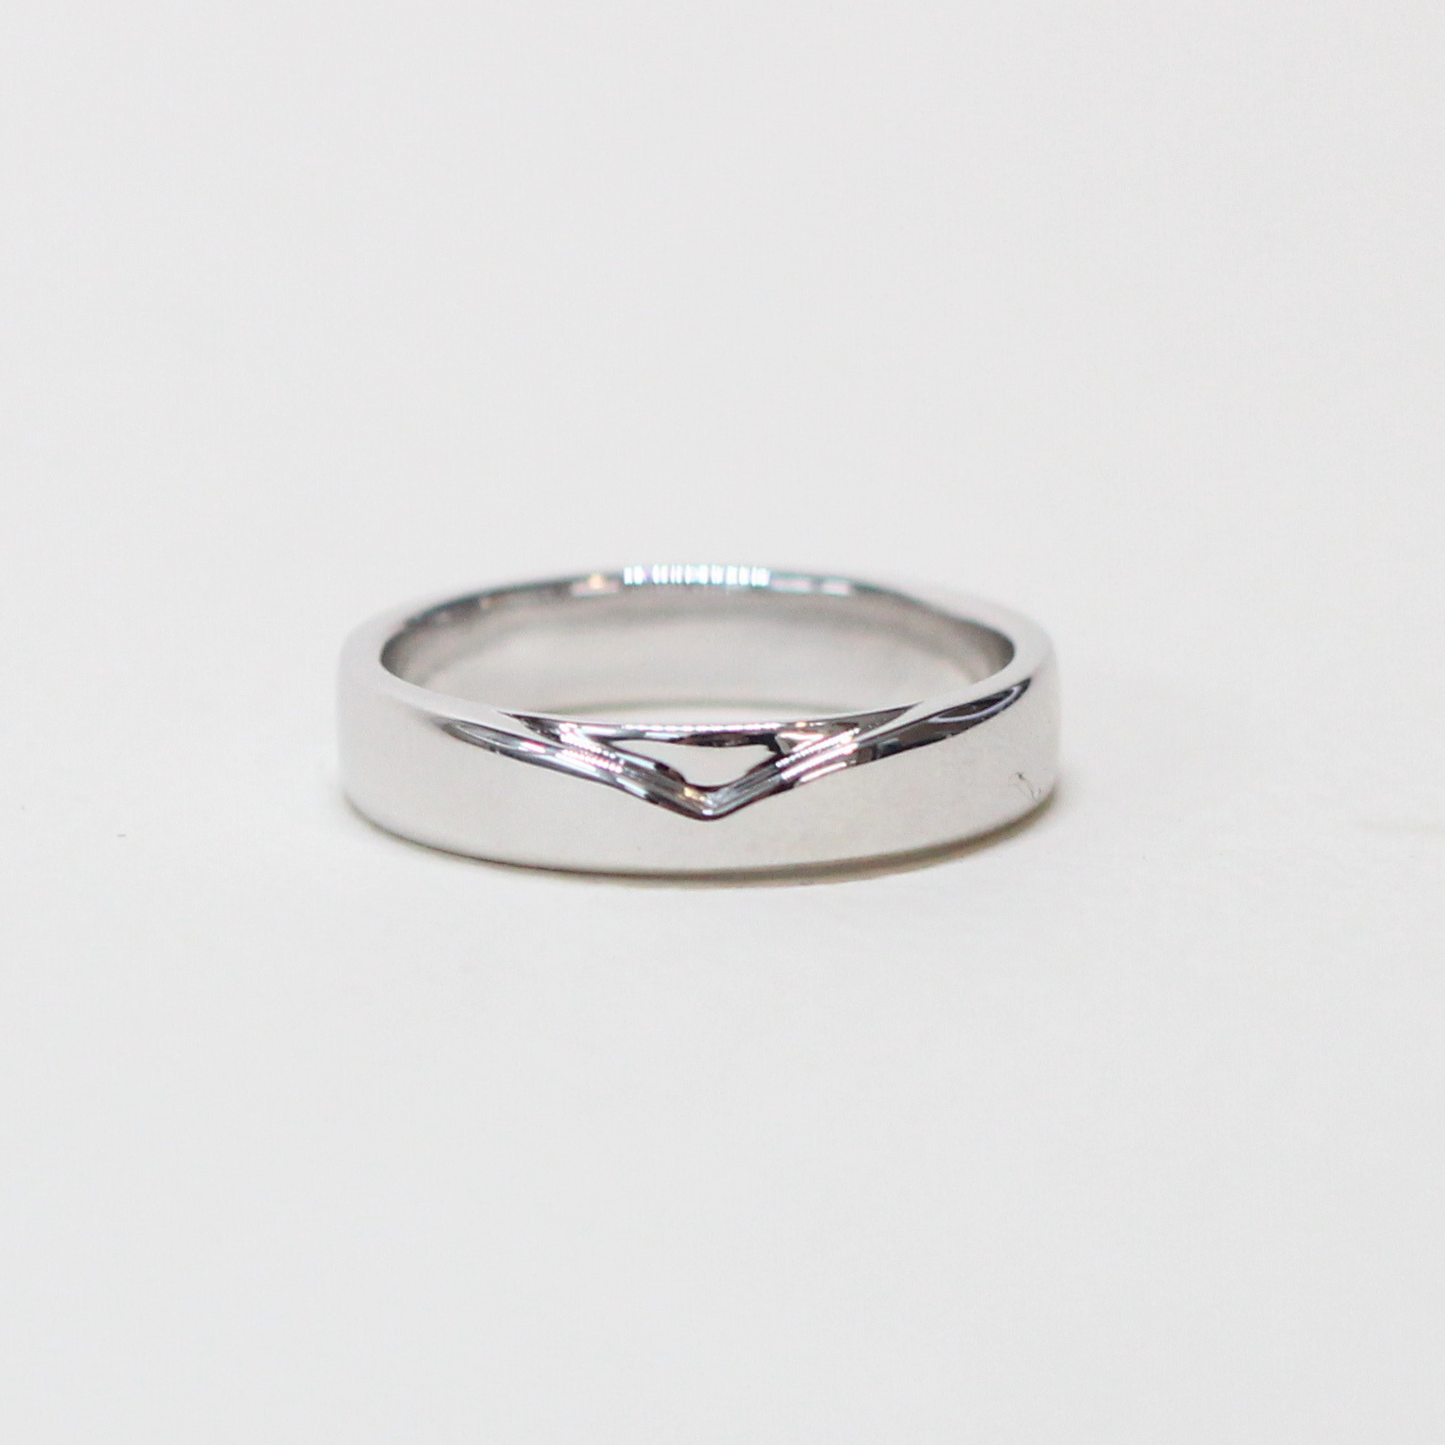 Plain Male wedding band with V-shaped accent